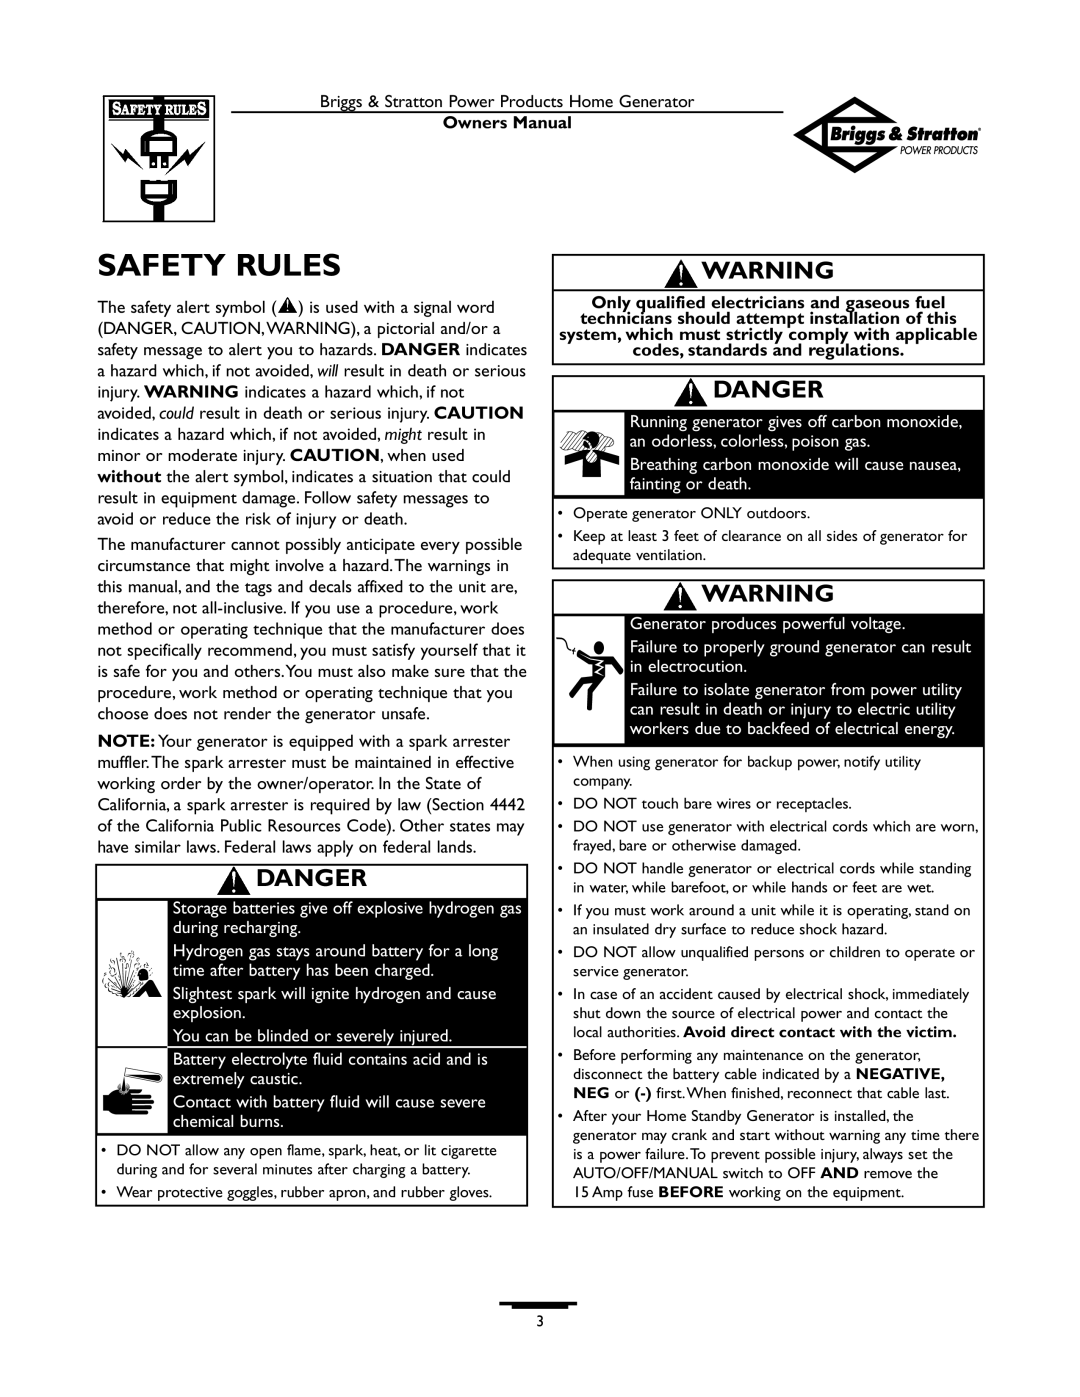 Briggs & Stratton 12KW, 10KW owner manual Safety Rules, Danger 